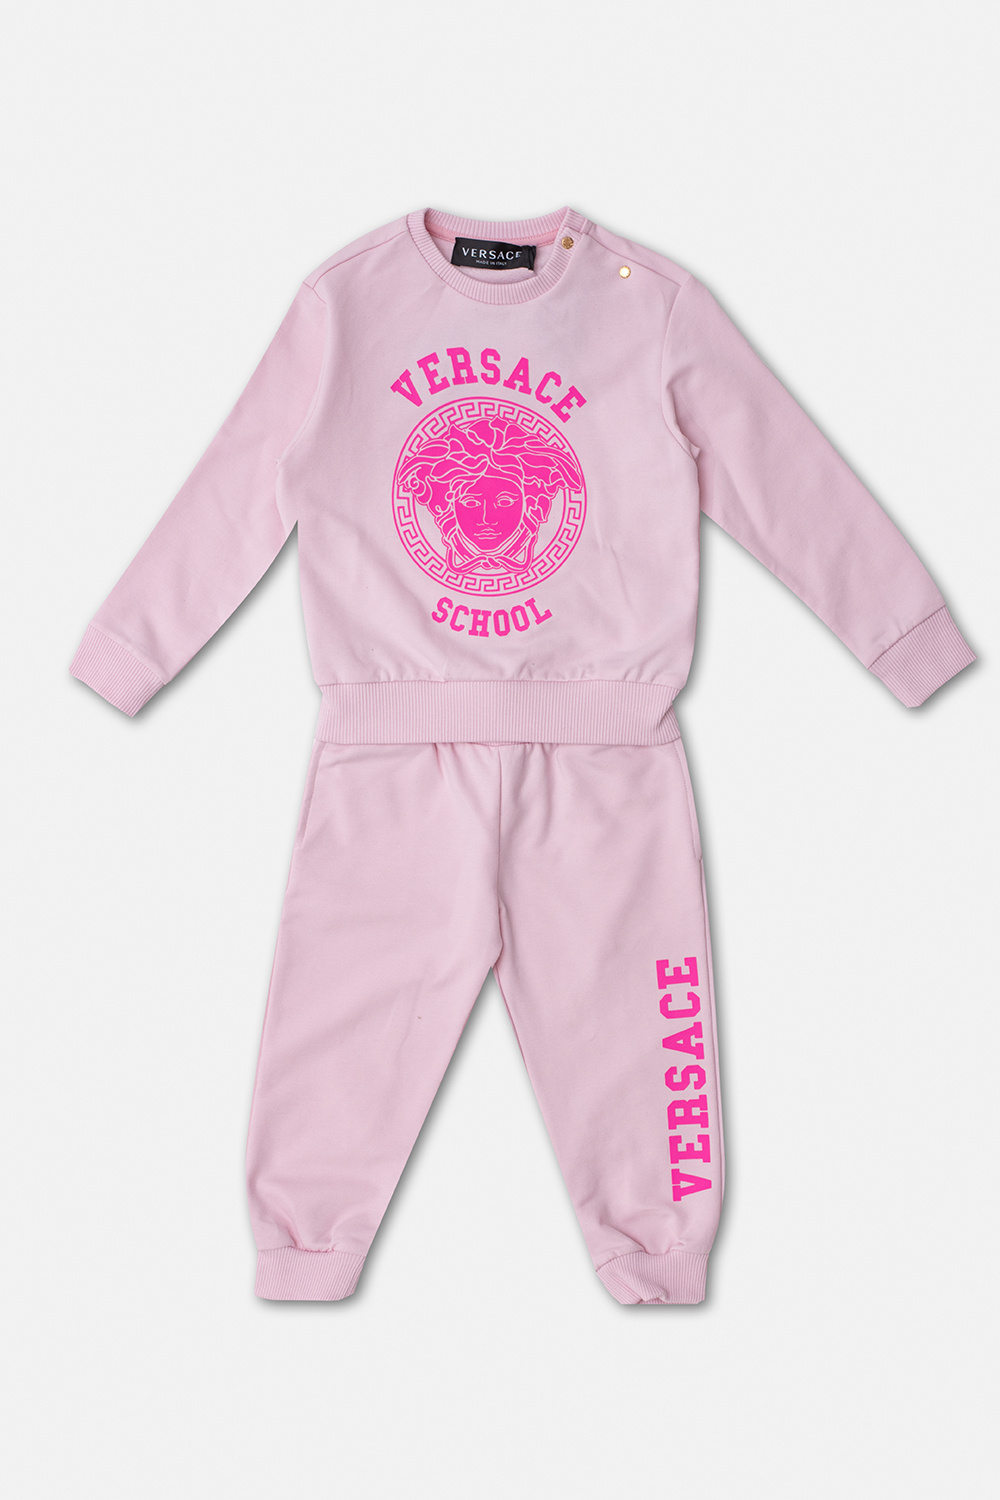 Versace Kids Removable 130g Thermal Jacket Can Be Used Separately